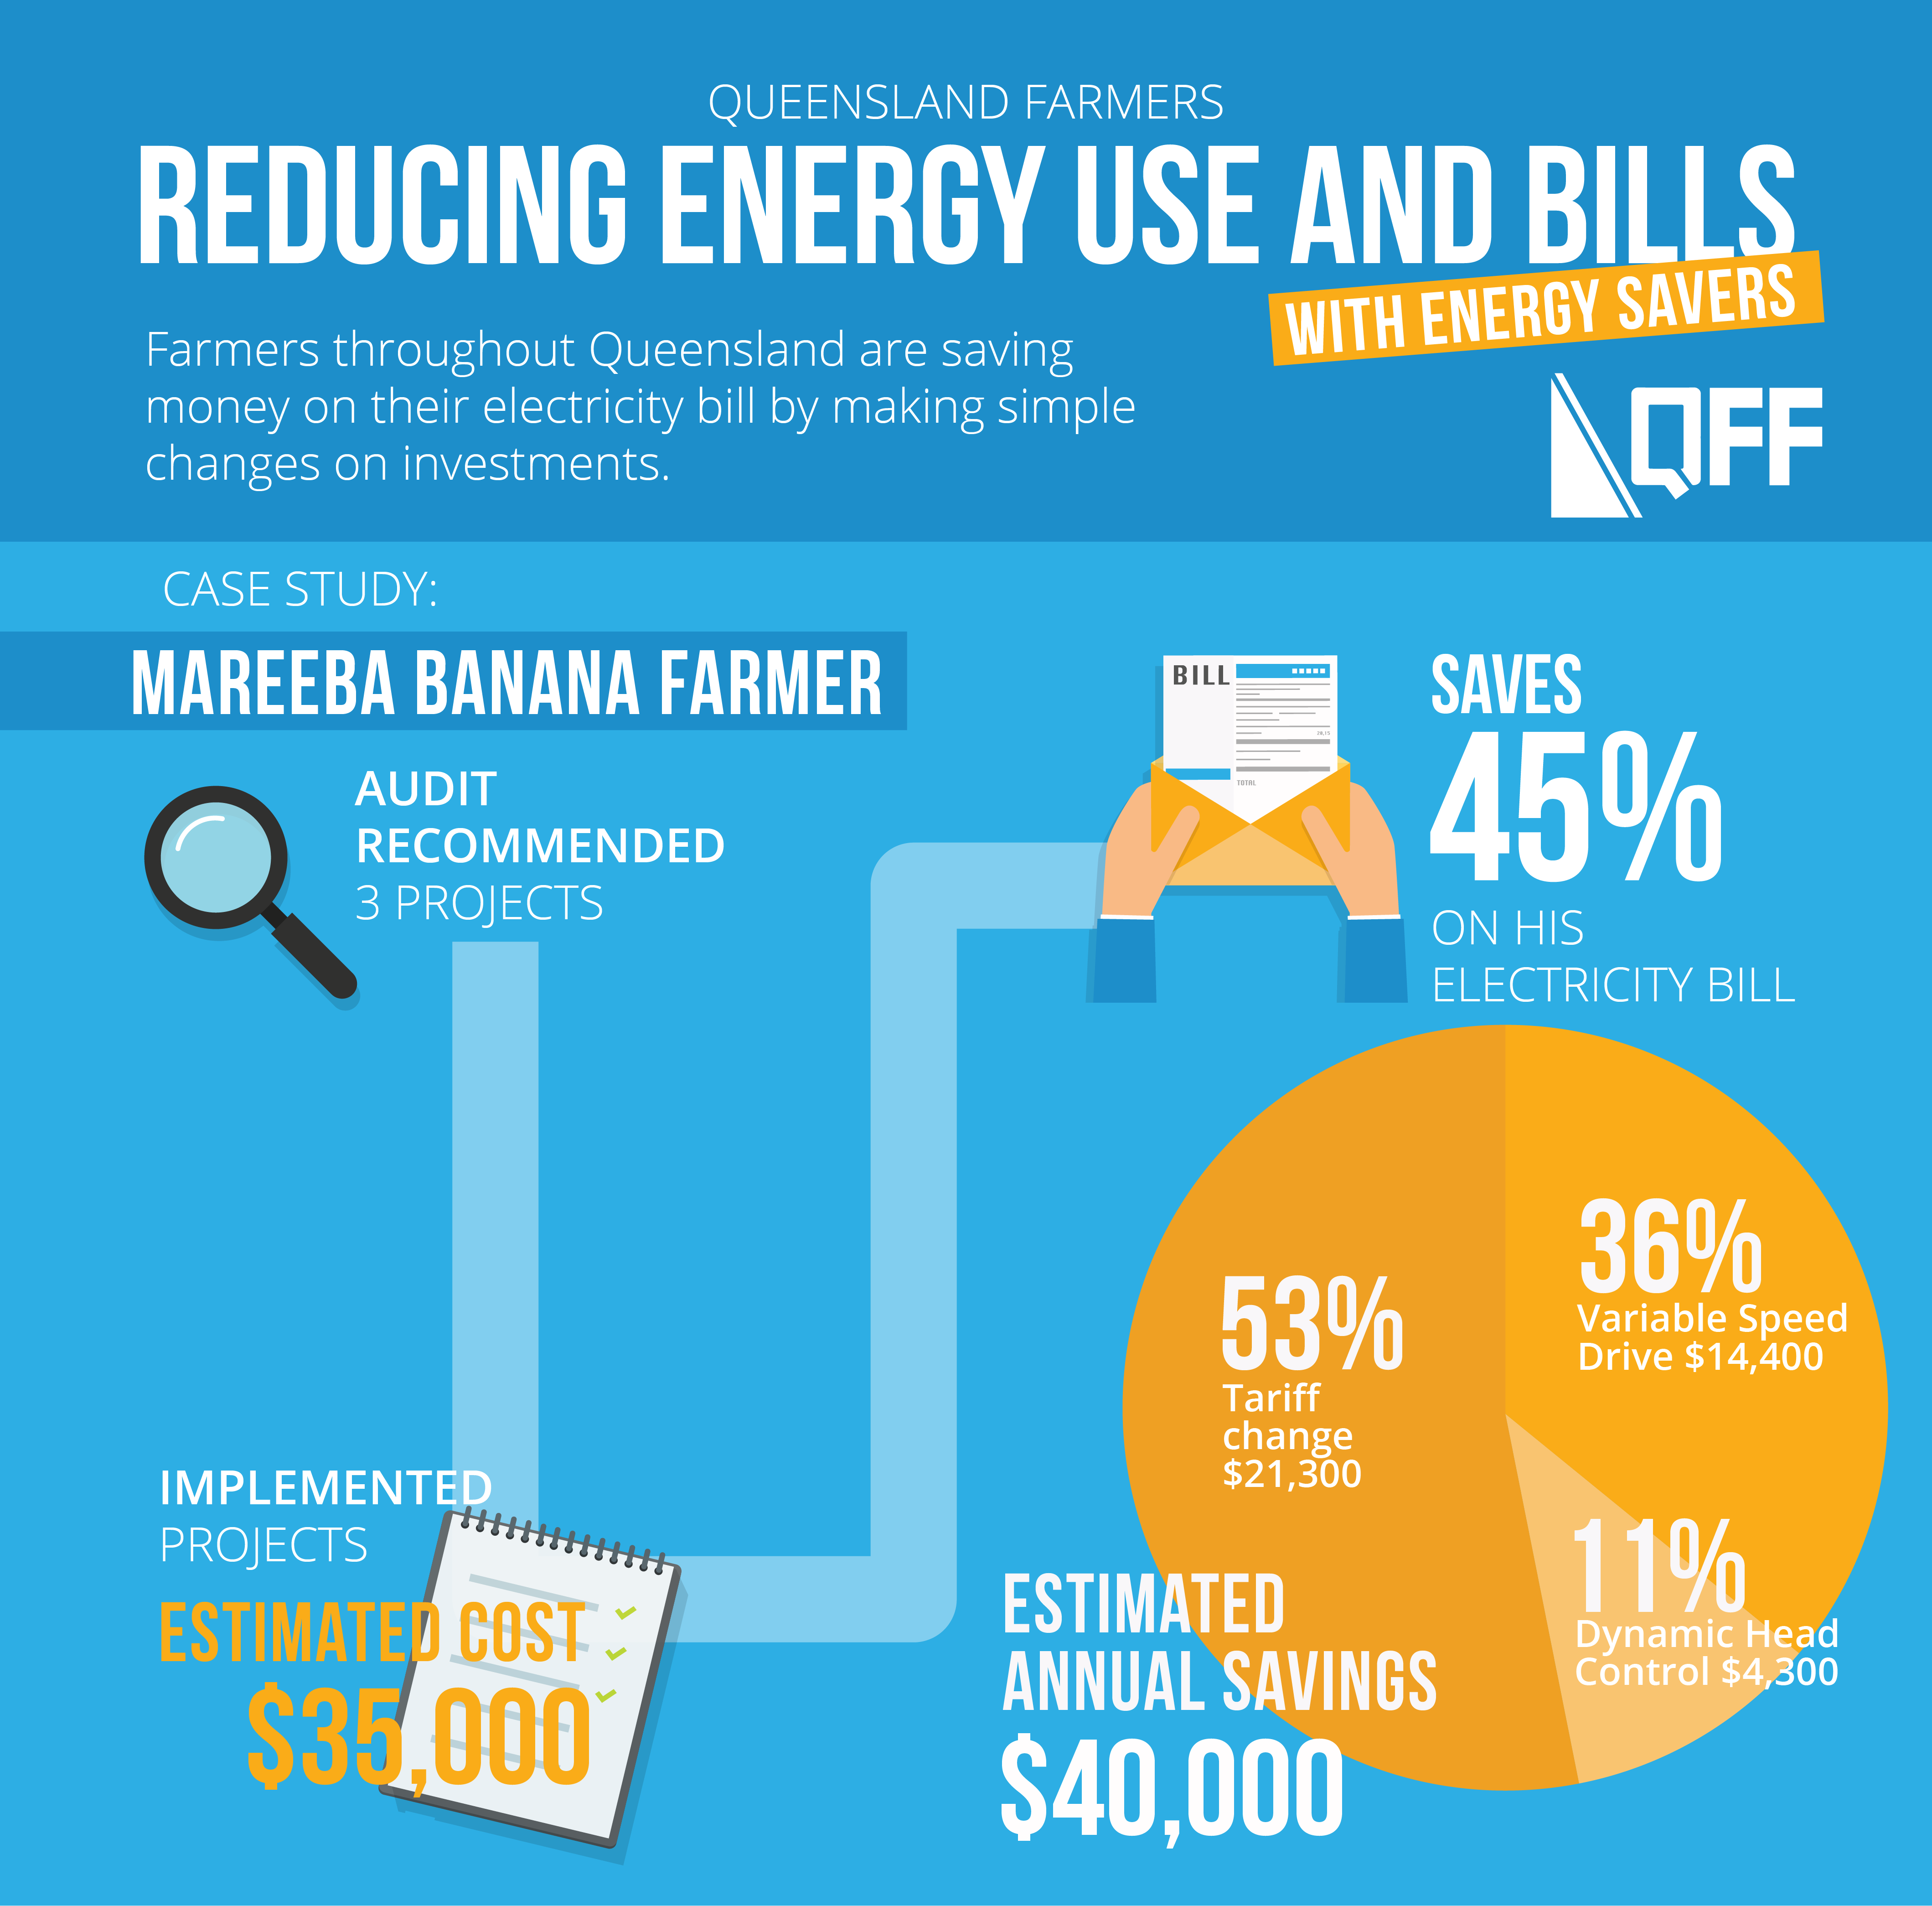 queensland-farmers-serious-about-energy-efficiencies-and-renewables